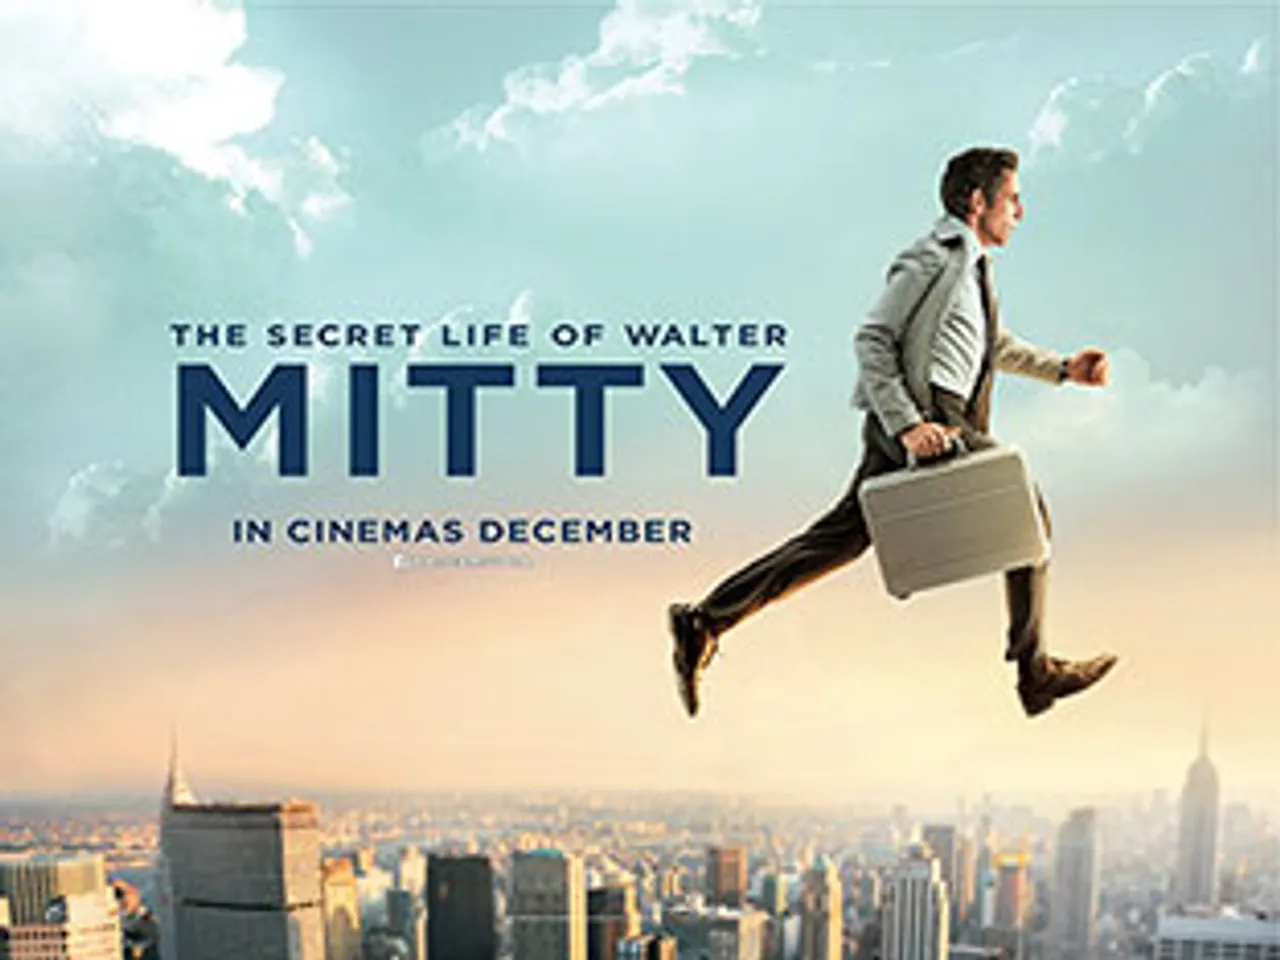 Movies Now to air 'The Secret Life of Walter Mitty' on April 30